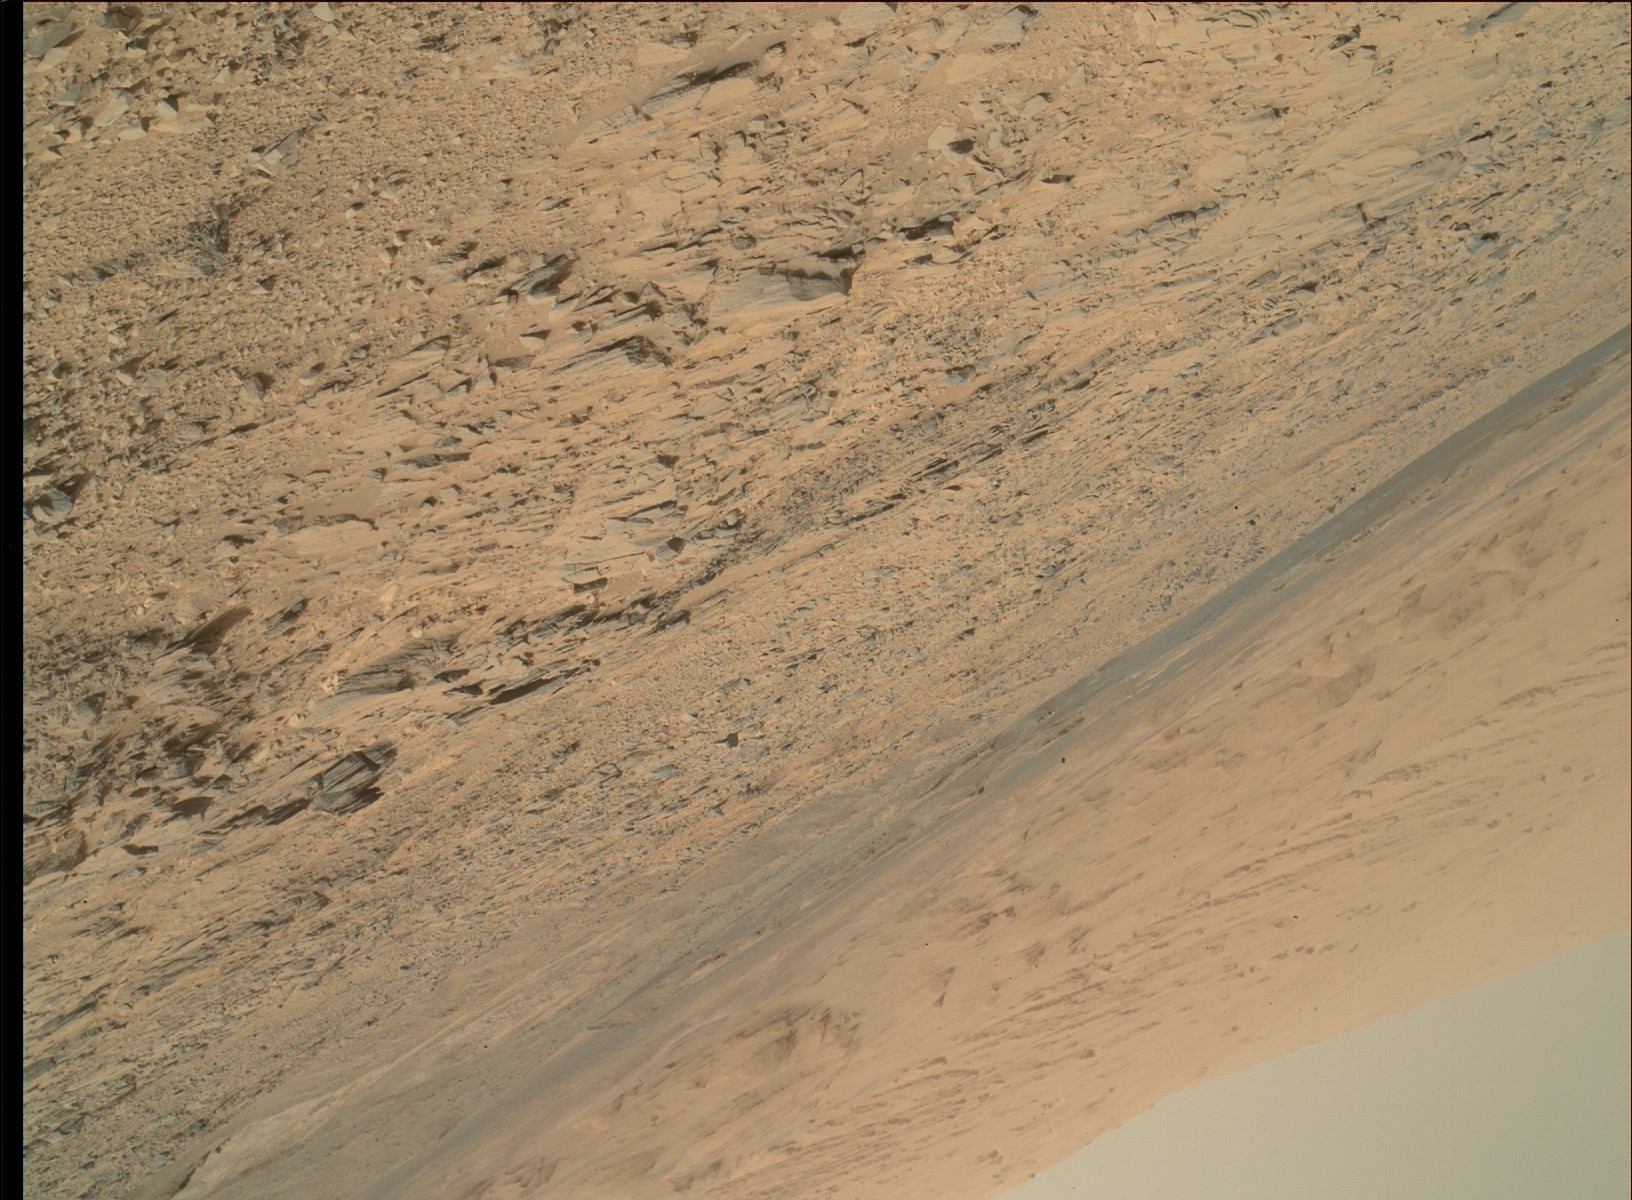 Nasa's Mars rover Curiosity acquired this image using its Mars Hand Lens Imager (MAHLI) on Sol 738